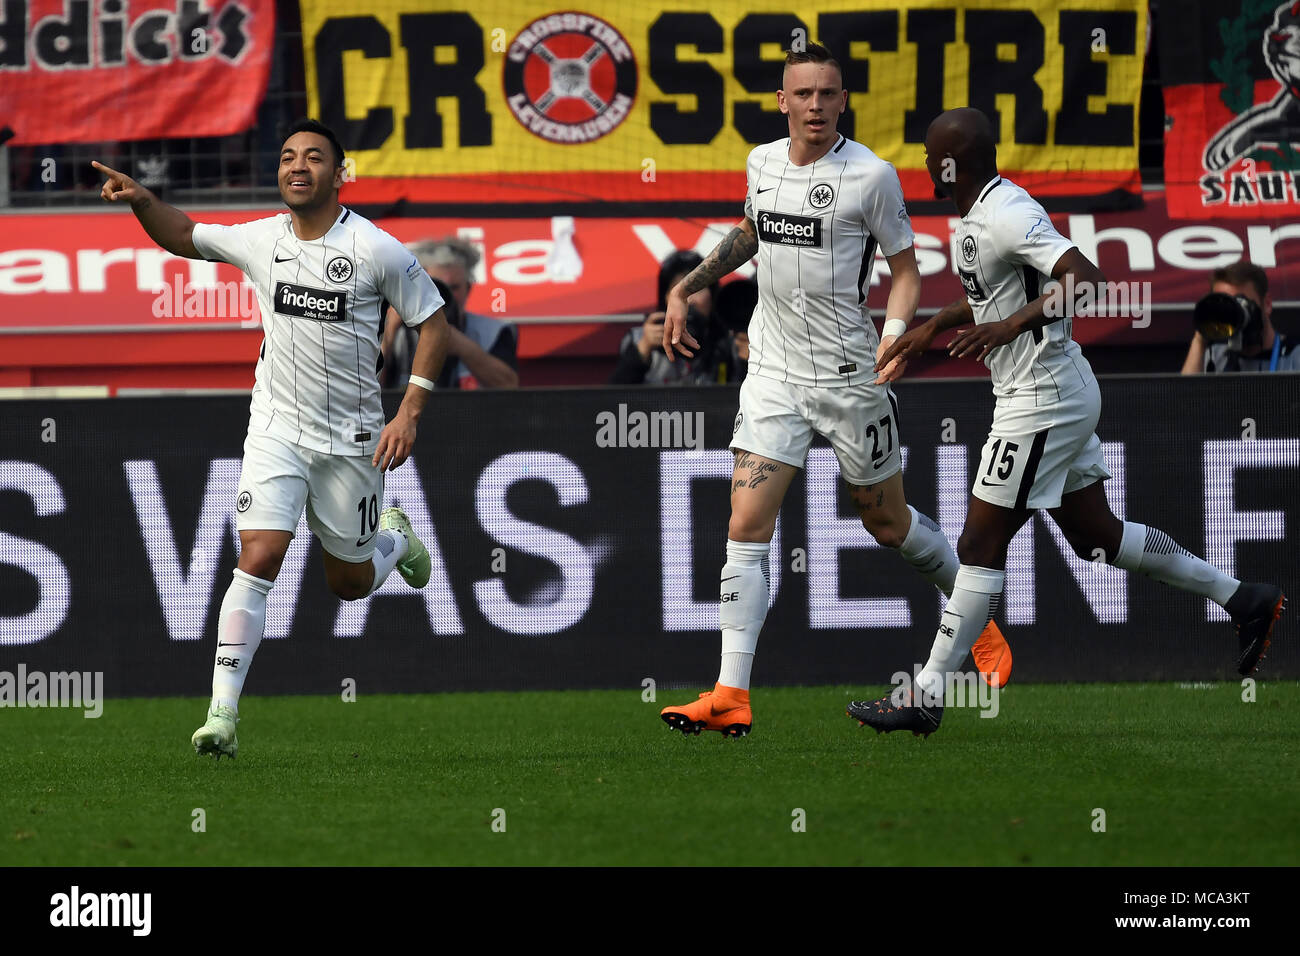 14 April 2018, Germany, Leverkusen: Soccer, Bundesliga, Bayer Leverkusen vs Eintracht Frankfurt at the BayArena: Frankfurt's goal scorer Marco Fabian (L-R), Marius Wolf and Jetro Willems celebrate the 1-1 goal. Photo: Federico Gambarini/dpa - ATTENTION: Due to the accreditation guidelines, the DFL only permits the publication and utilisation of up to 15 pictures per match on the internet and in online media during the match. Stock Photo